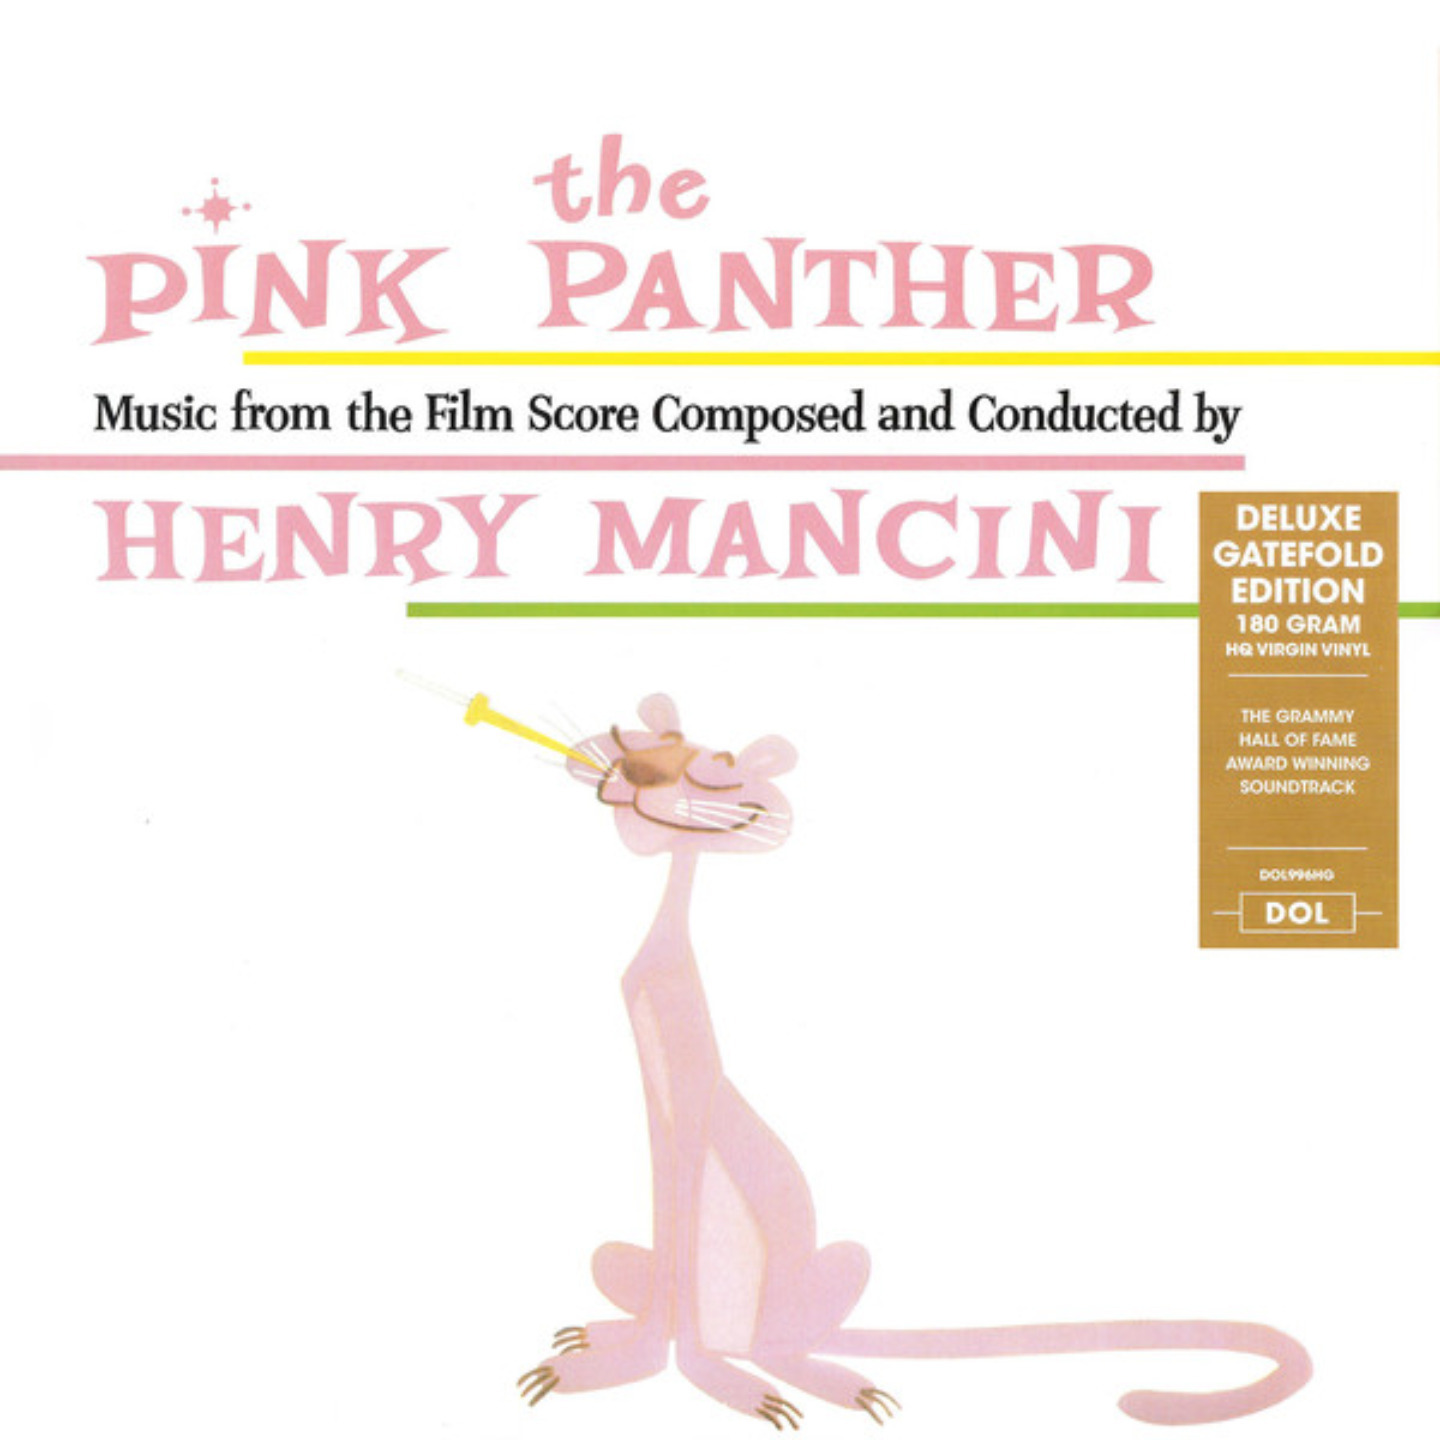 HENRY MANCINI - The Pink Panther (Music From The Film Score) LP (180g Virgin Vinyl)